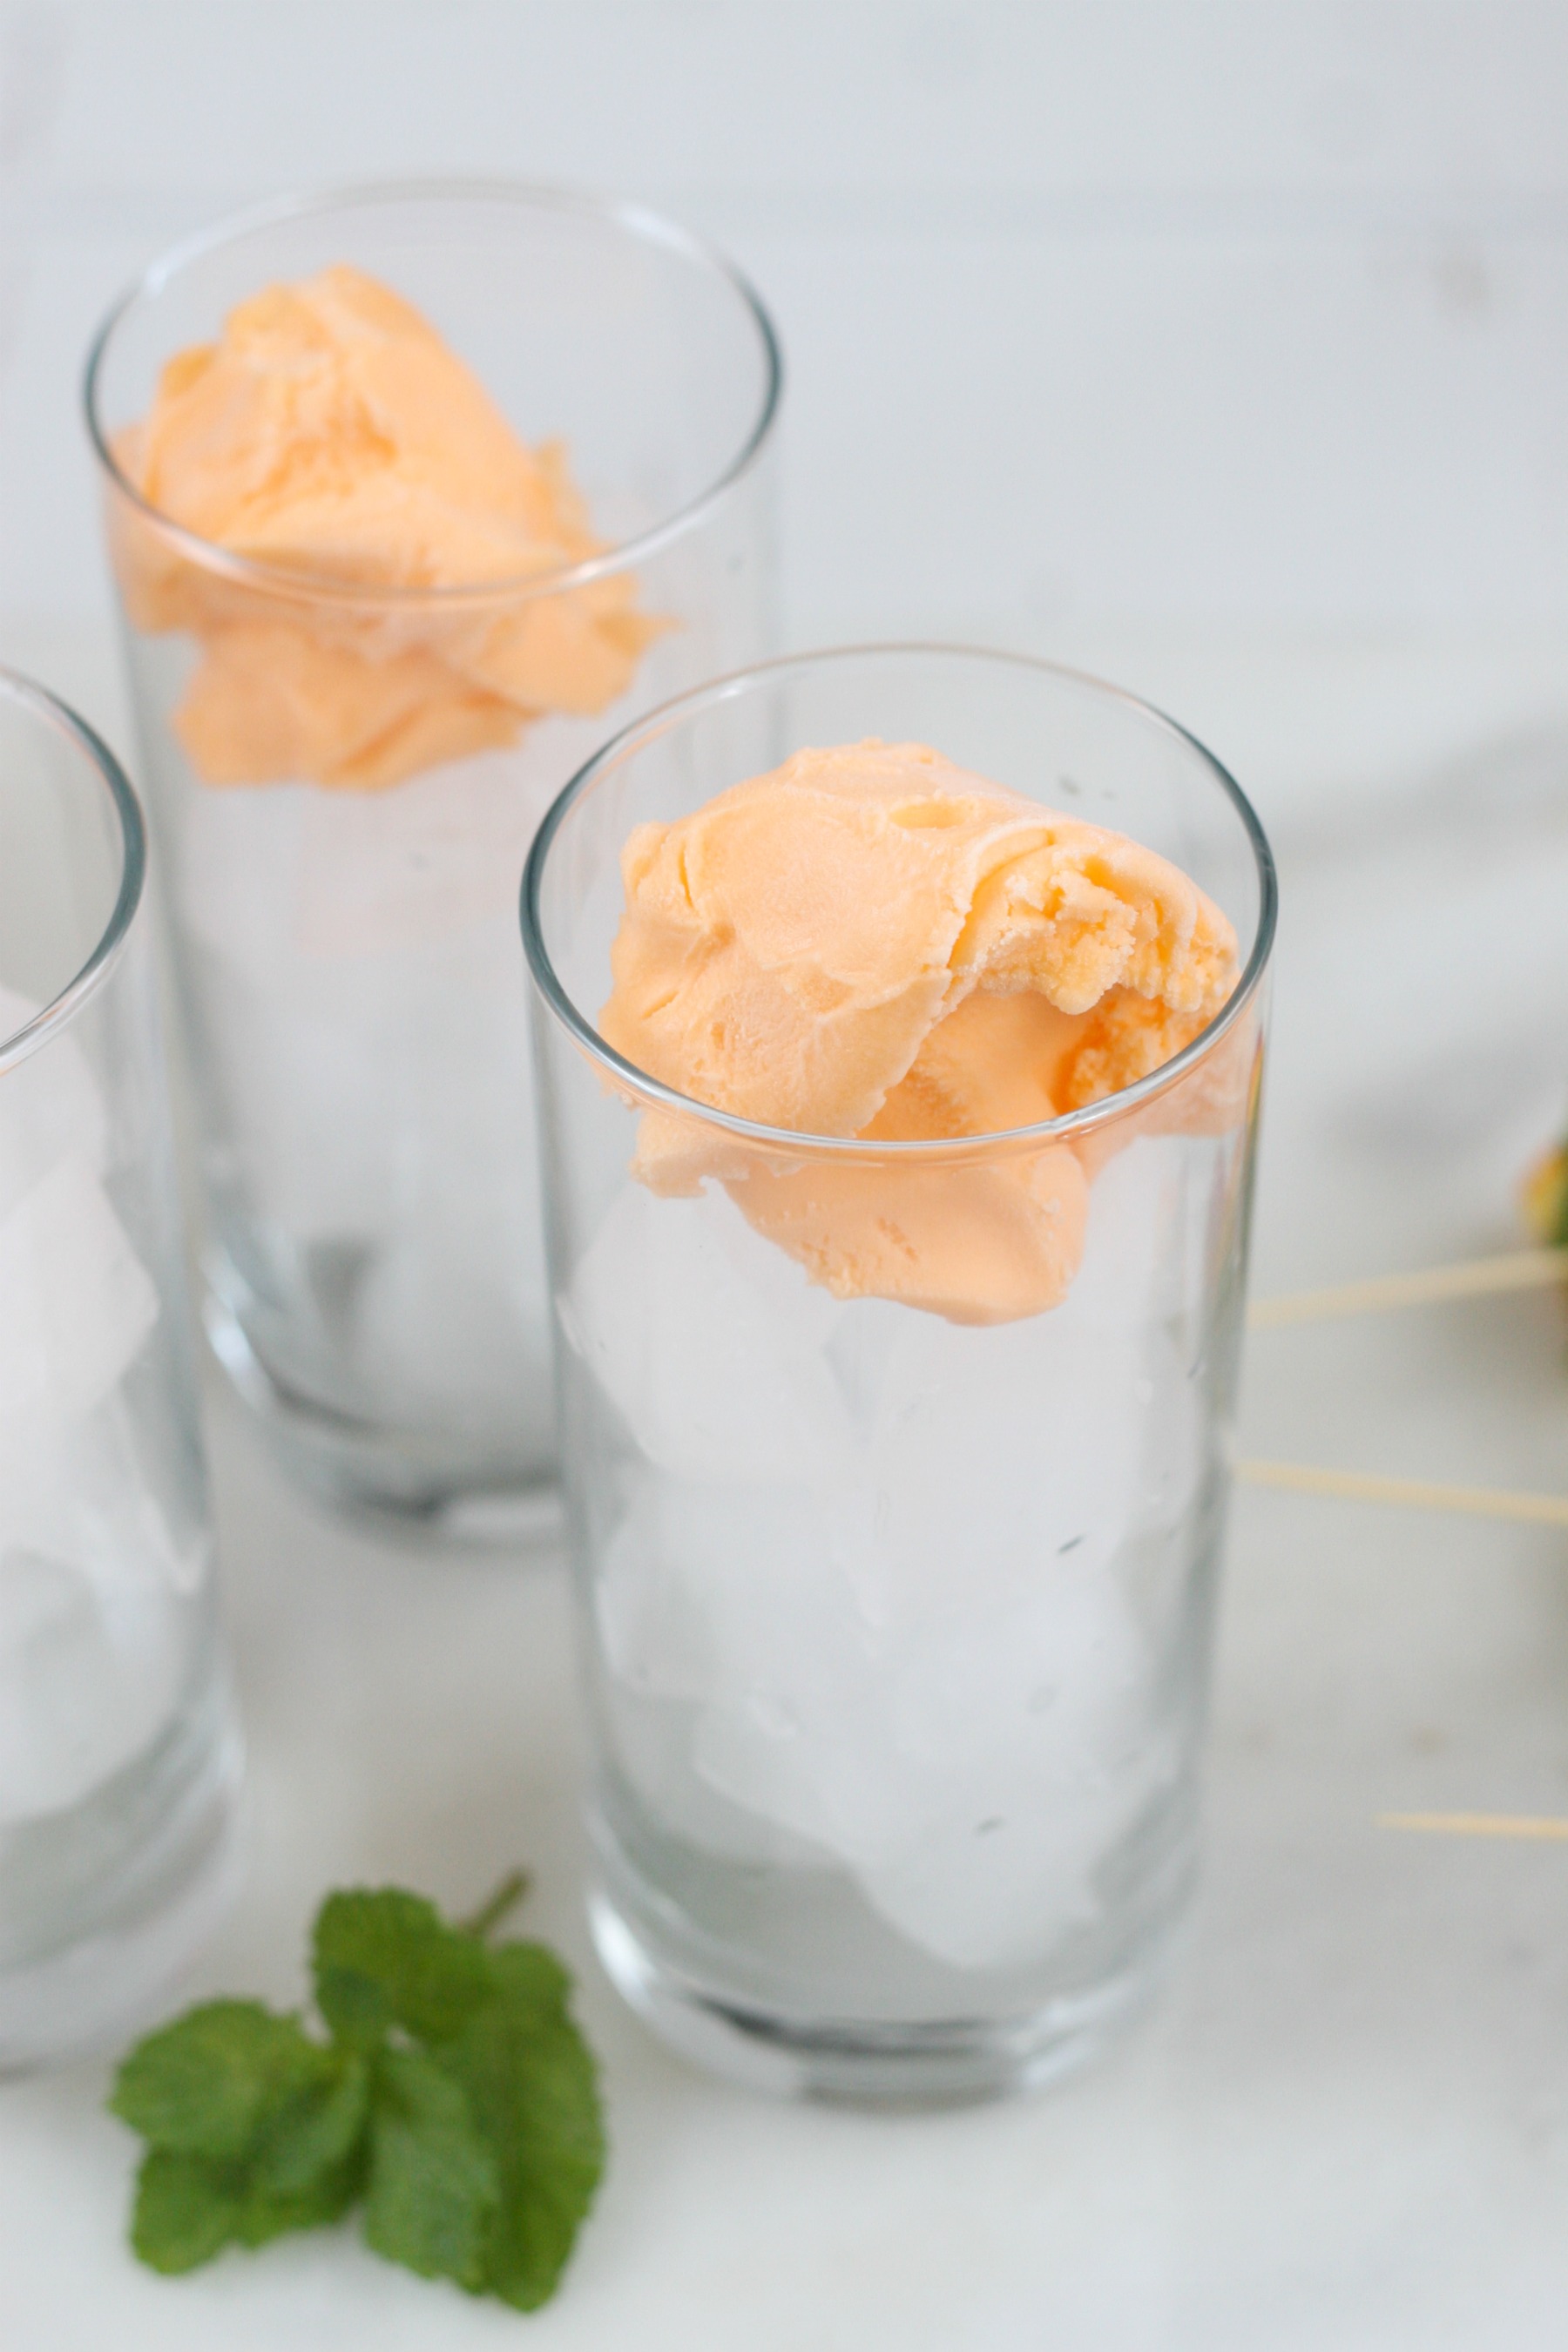 scoops of orange sherbert in cocktail glasses filled with ice.